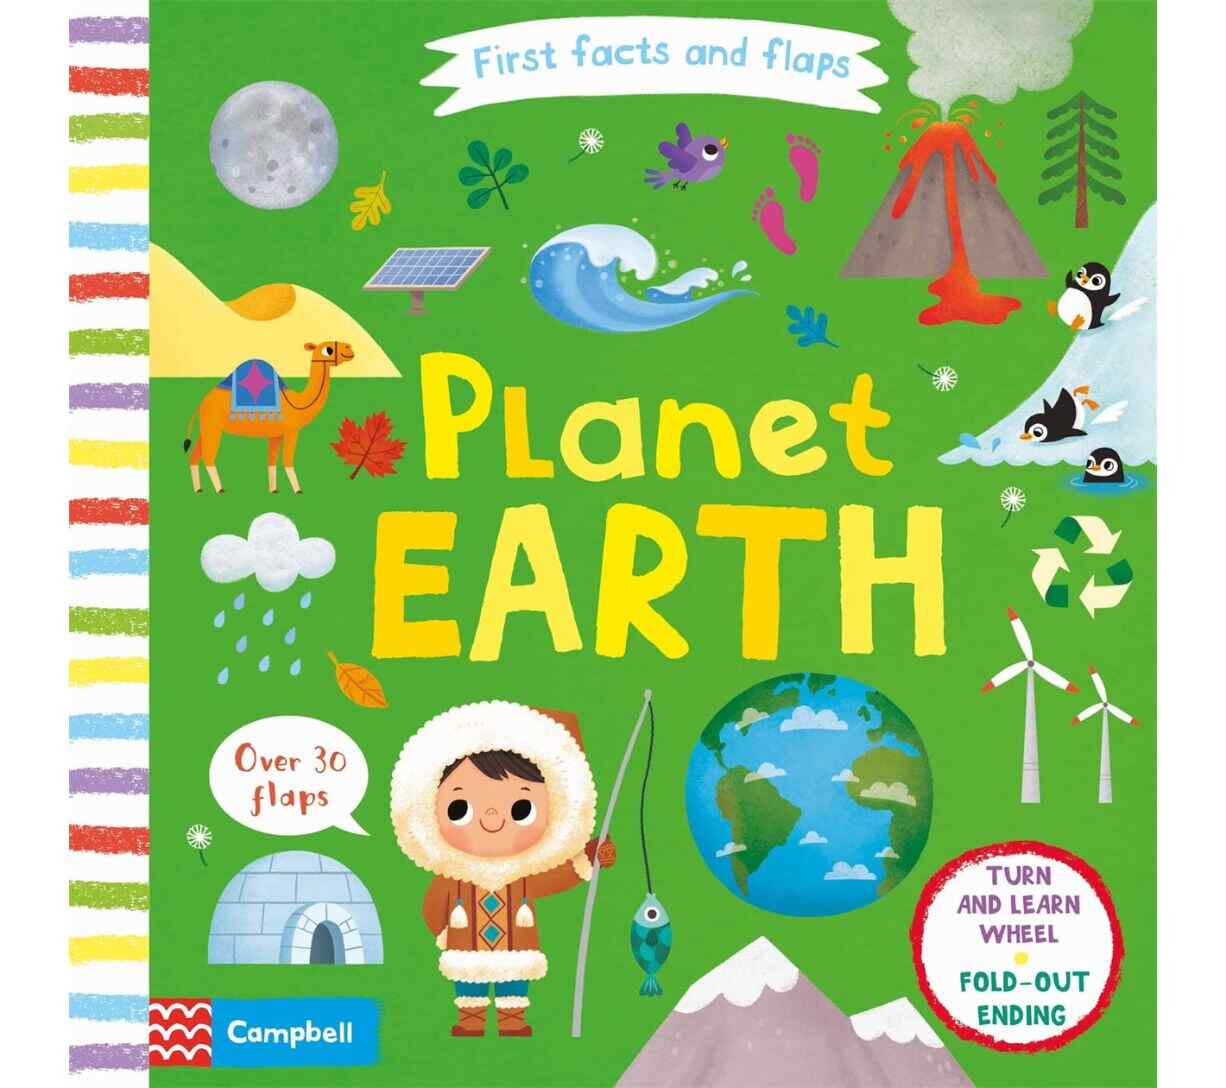 First Facts and Flaps: Planet Earth